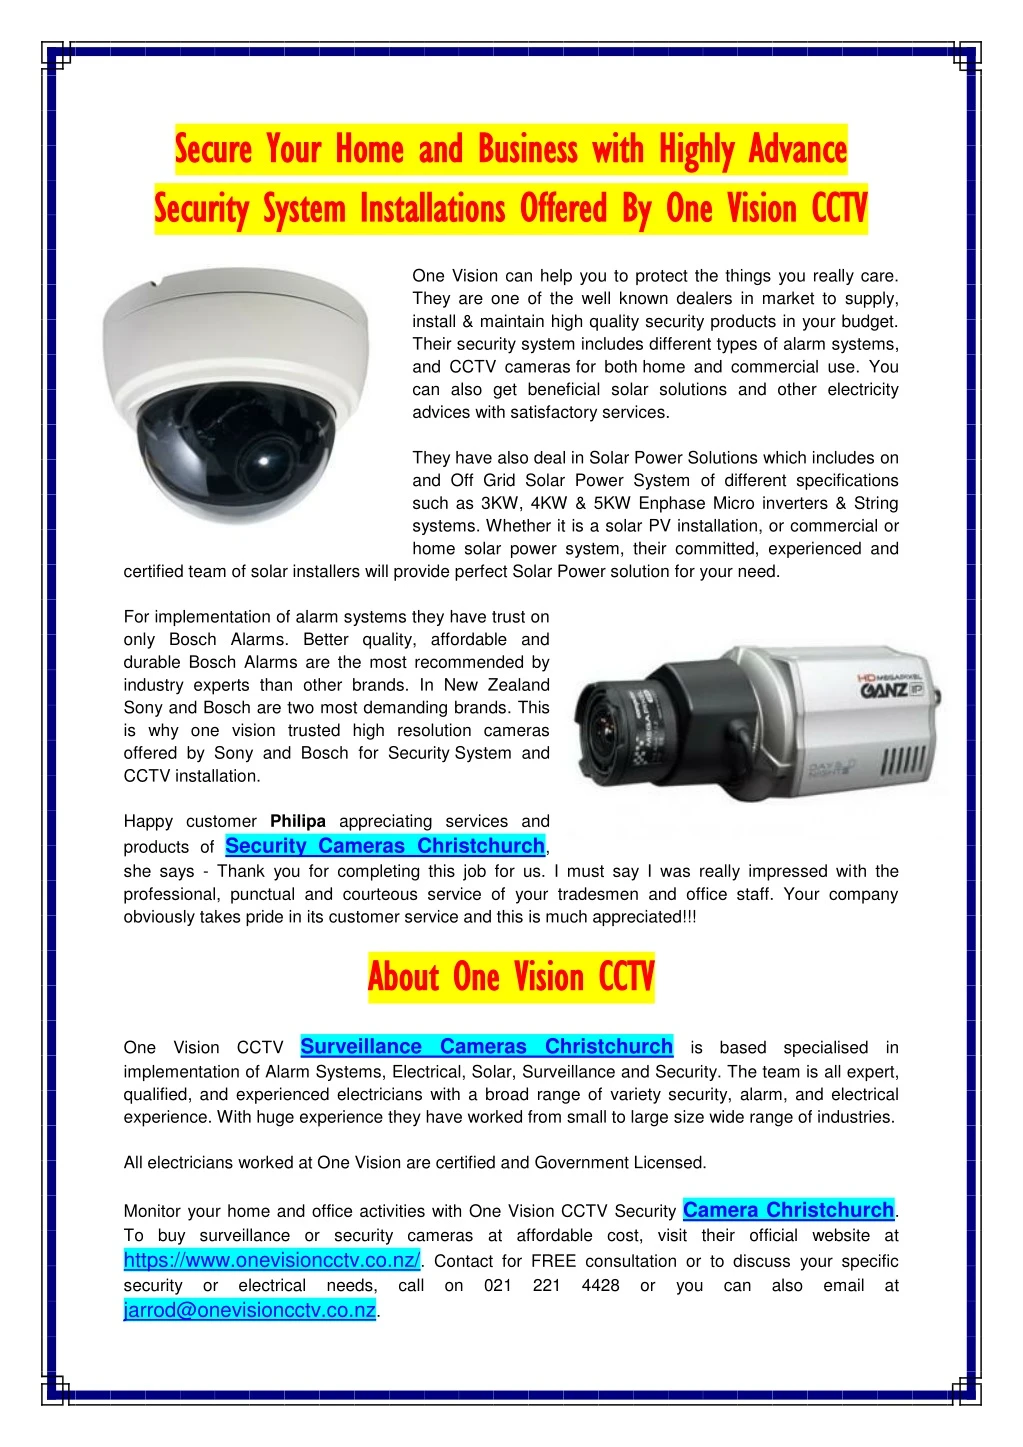 secure secure your home your home and security